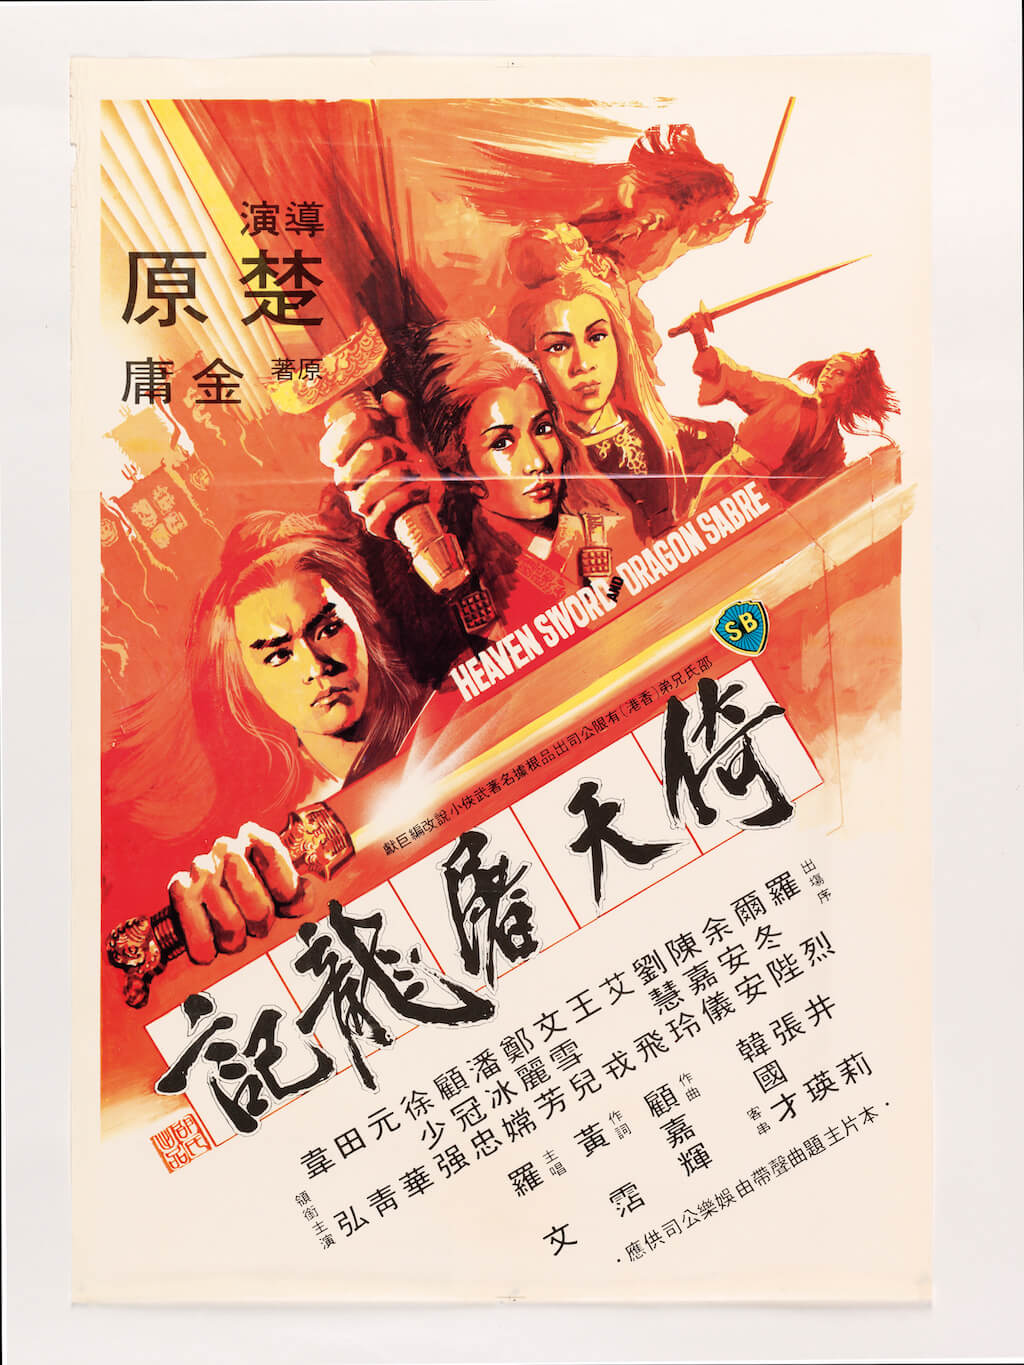 Promotional Poster for the Film Heaven Sword and Dragon Sabre 